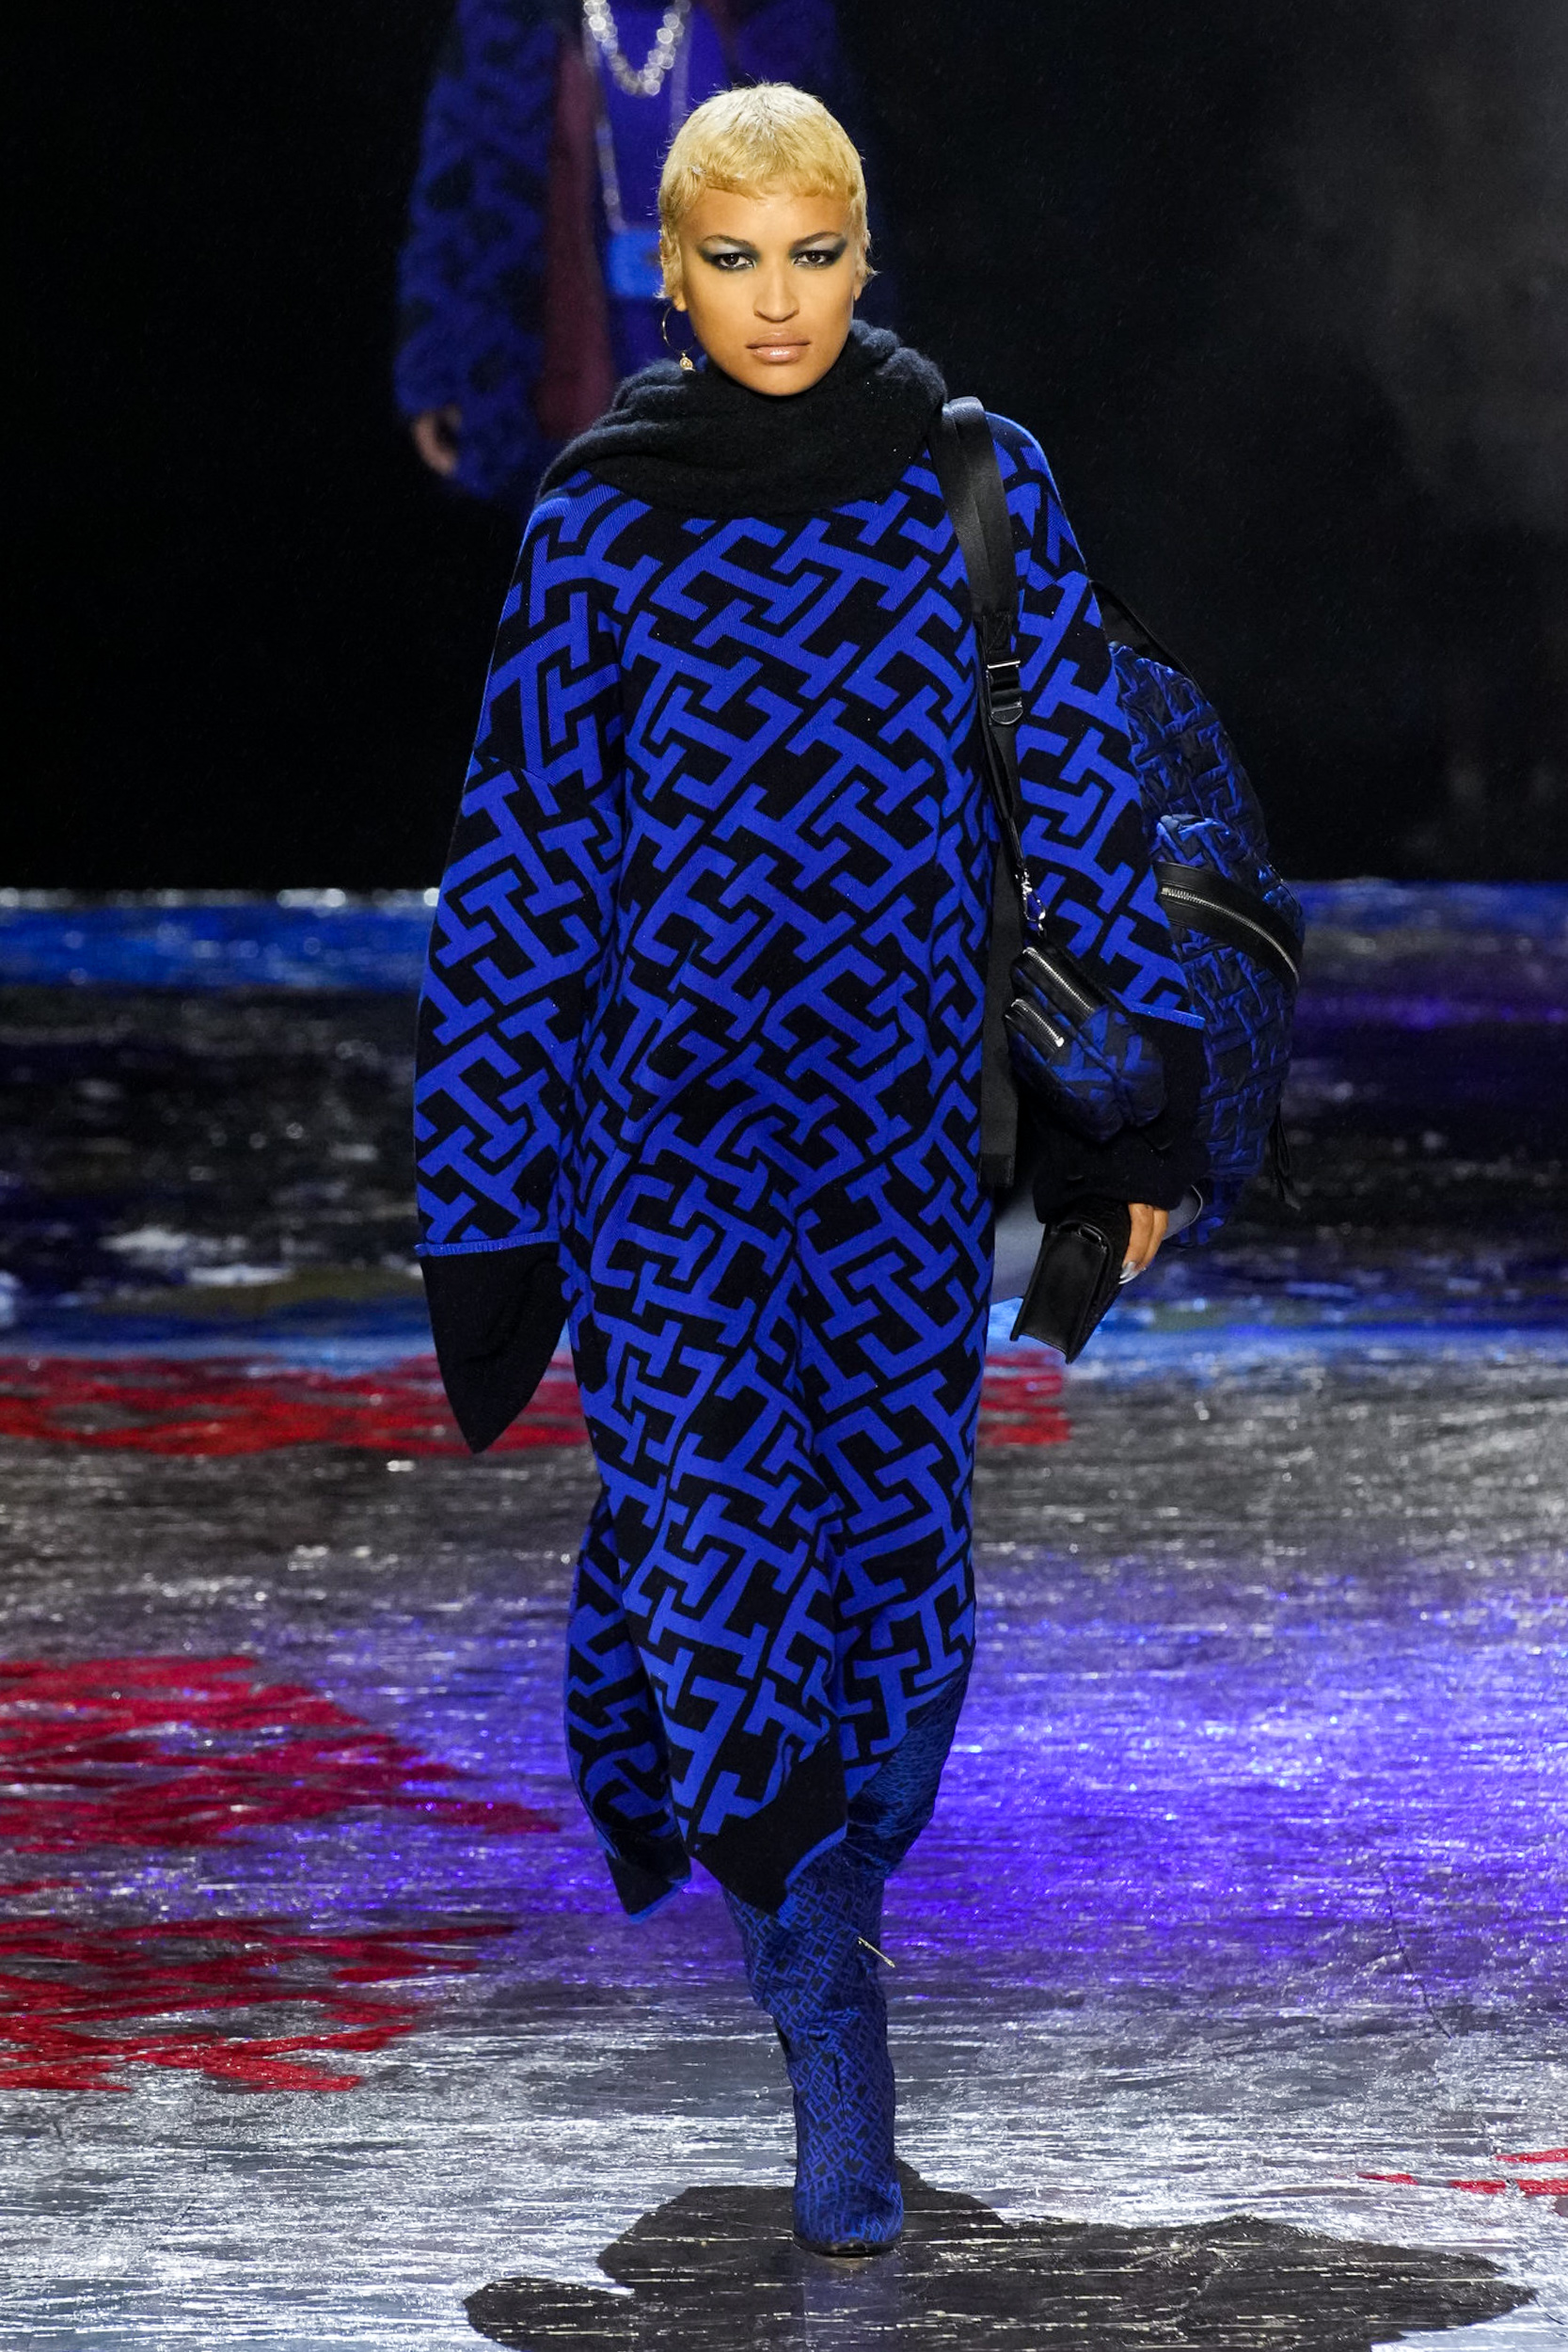 Denmark Viewer camouflage Tommy Hilfiger Fall 2022 Fashion Show | The Impression